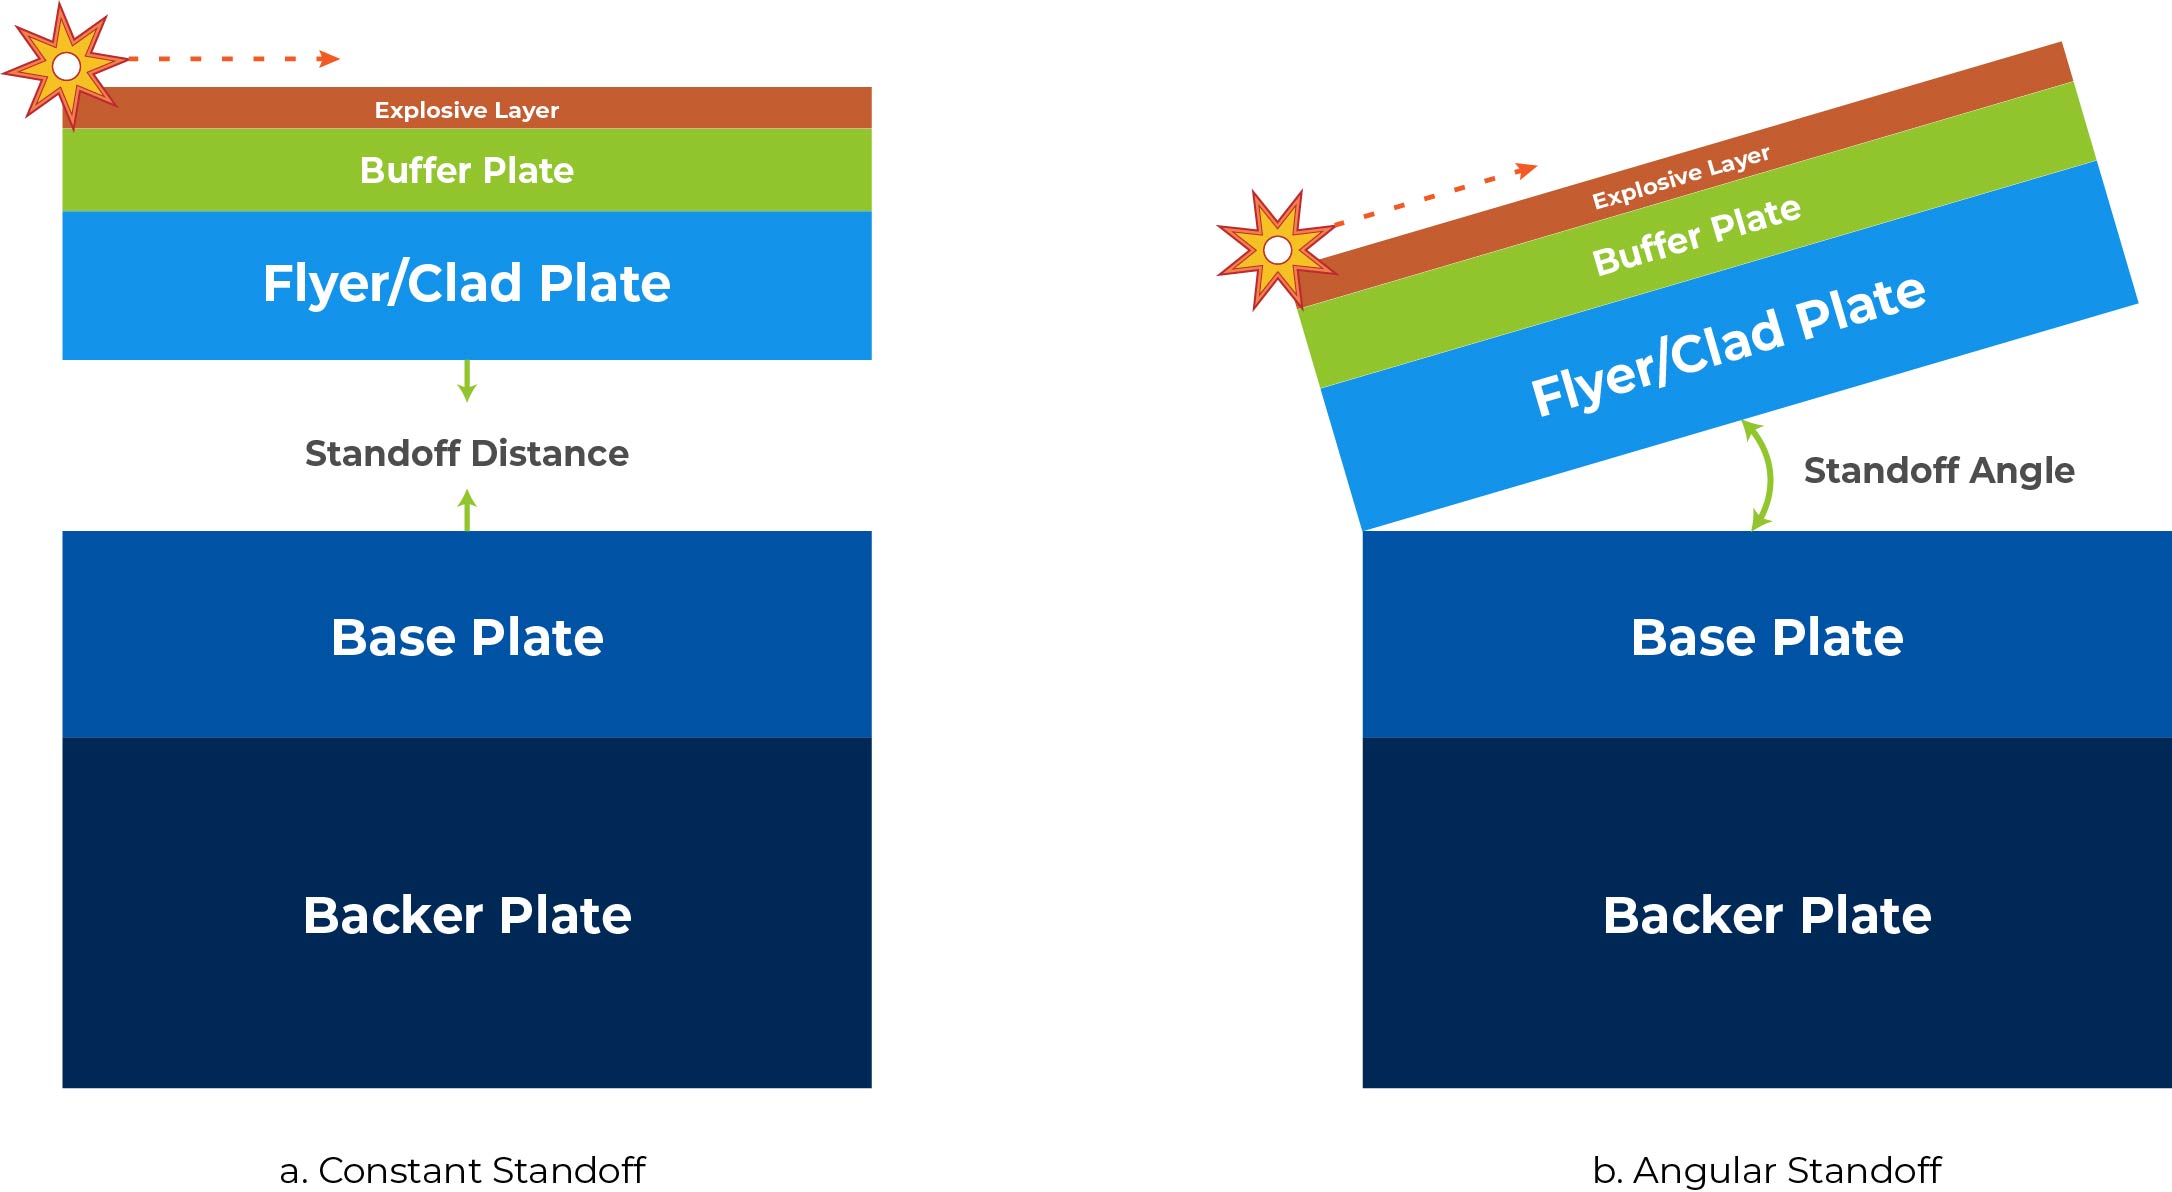 Graphic of explosive welding process showing the explosive layer, buffer layer, flyer or cad plate layer, base plate, and backer plate.